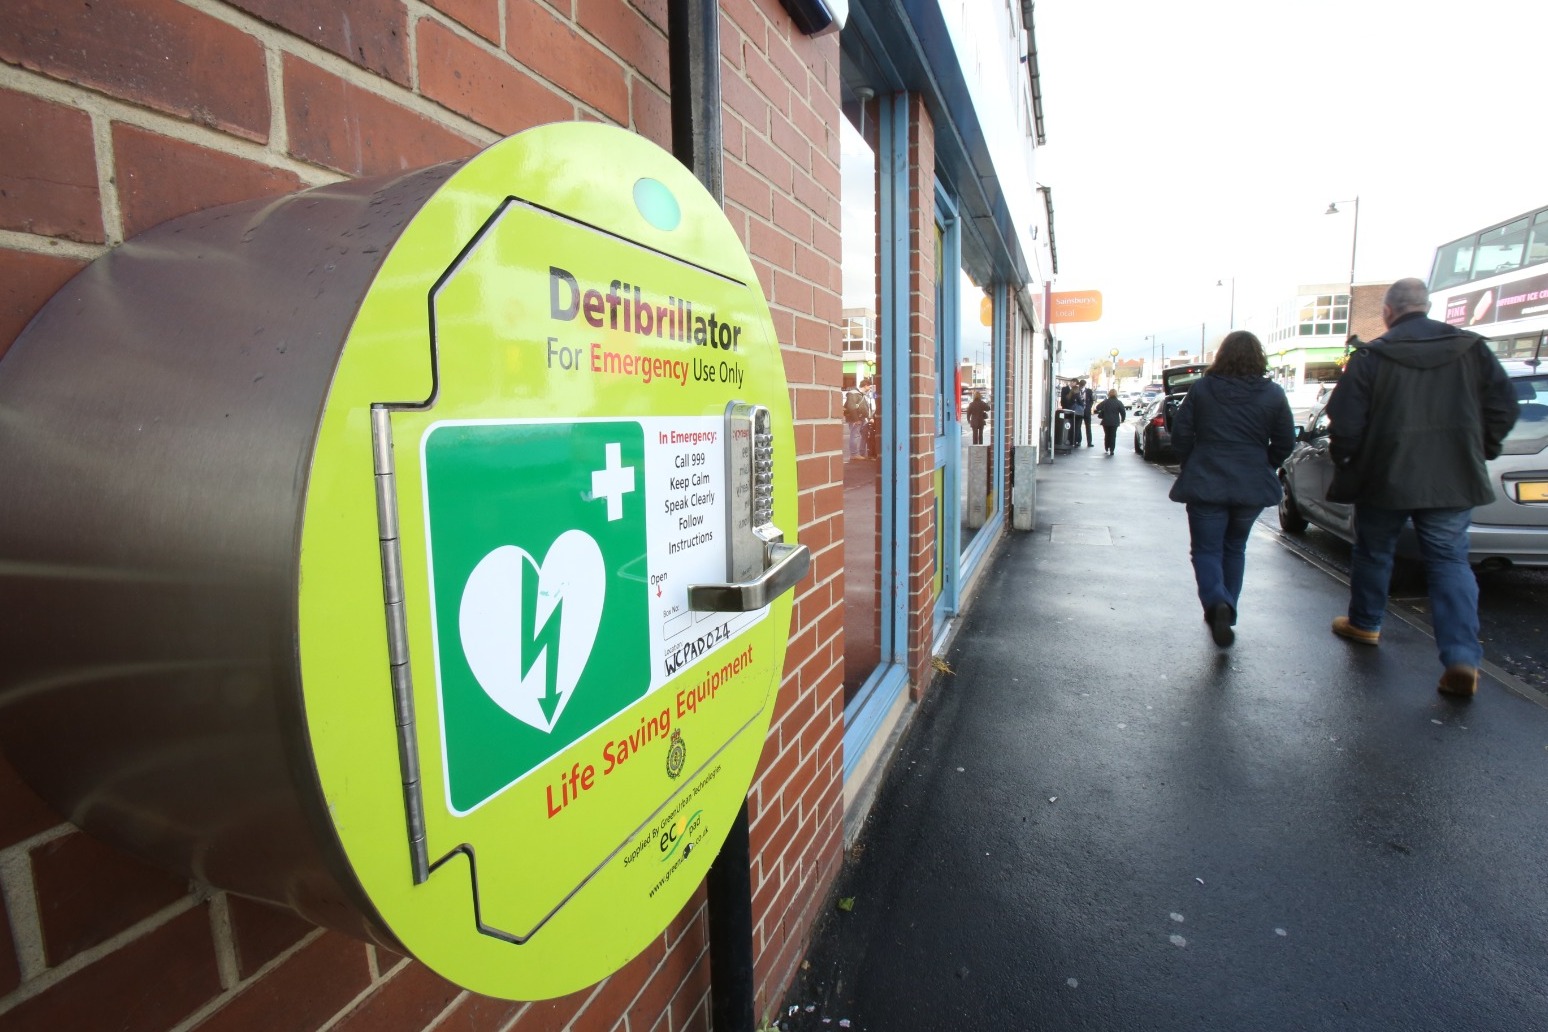 £1m funding set to boost defibrillator numbers 